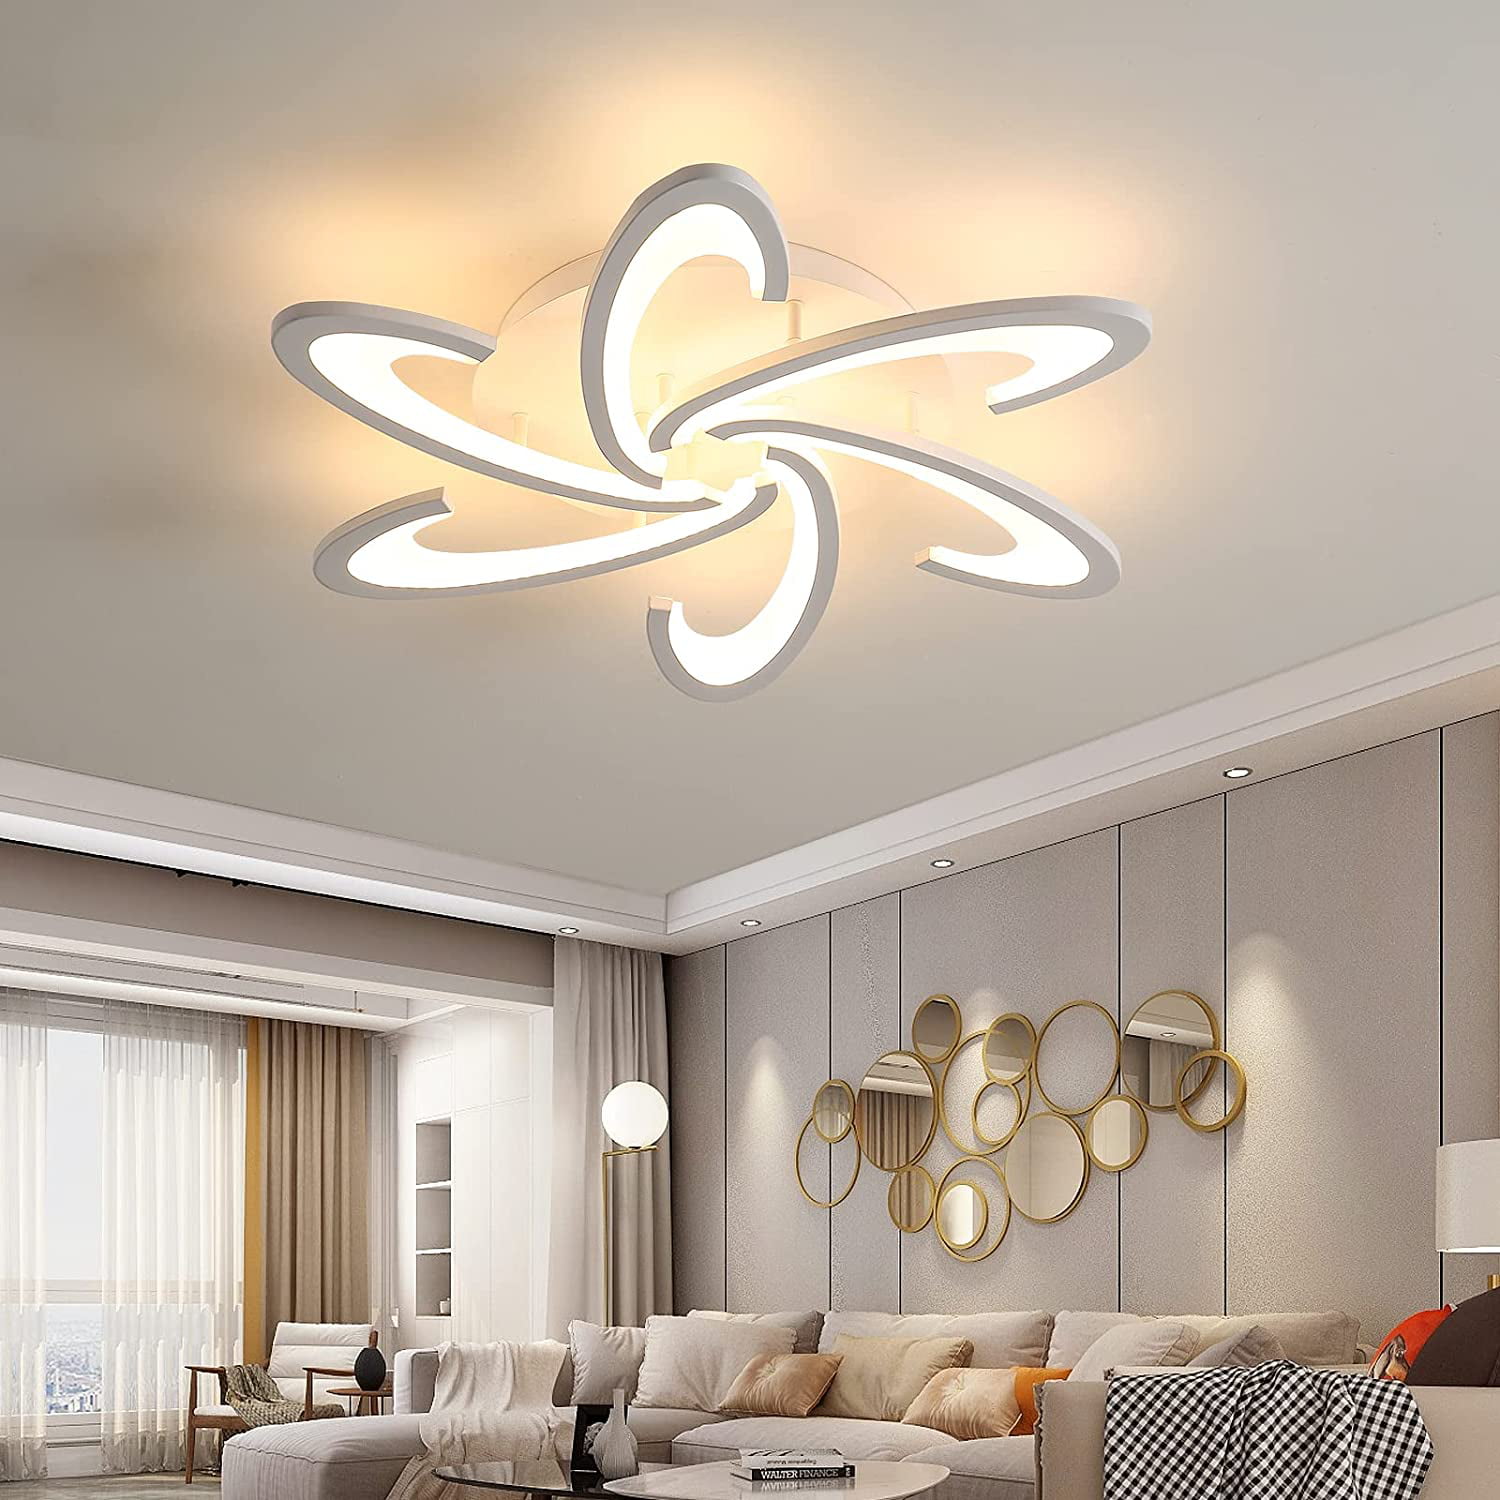 LED Flush Mounted Ceiling Fixture Dimmable Remote Control Dining Room Lighting 